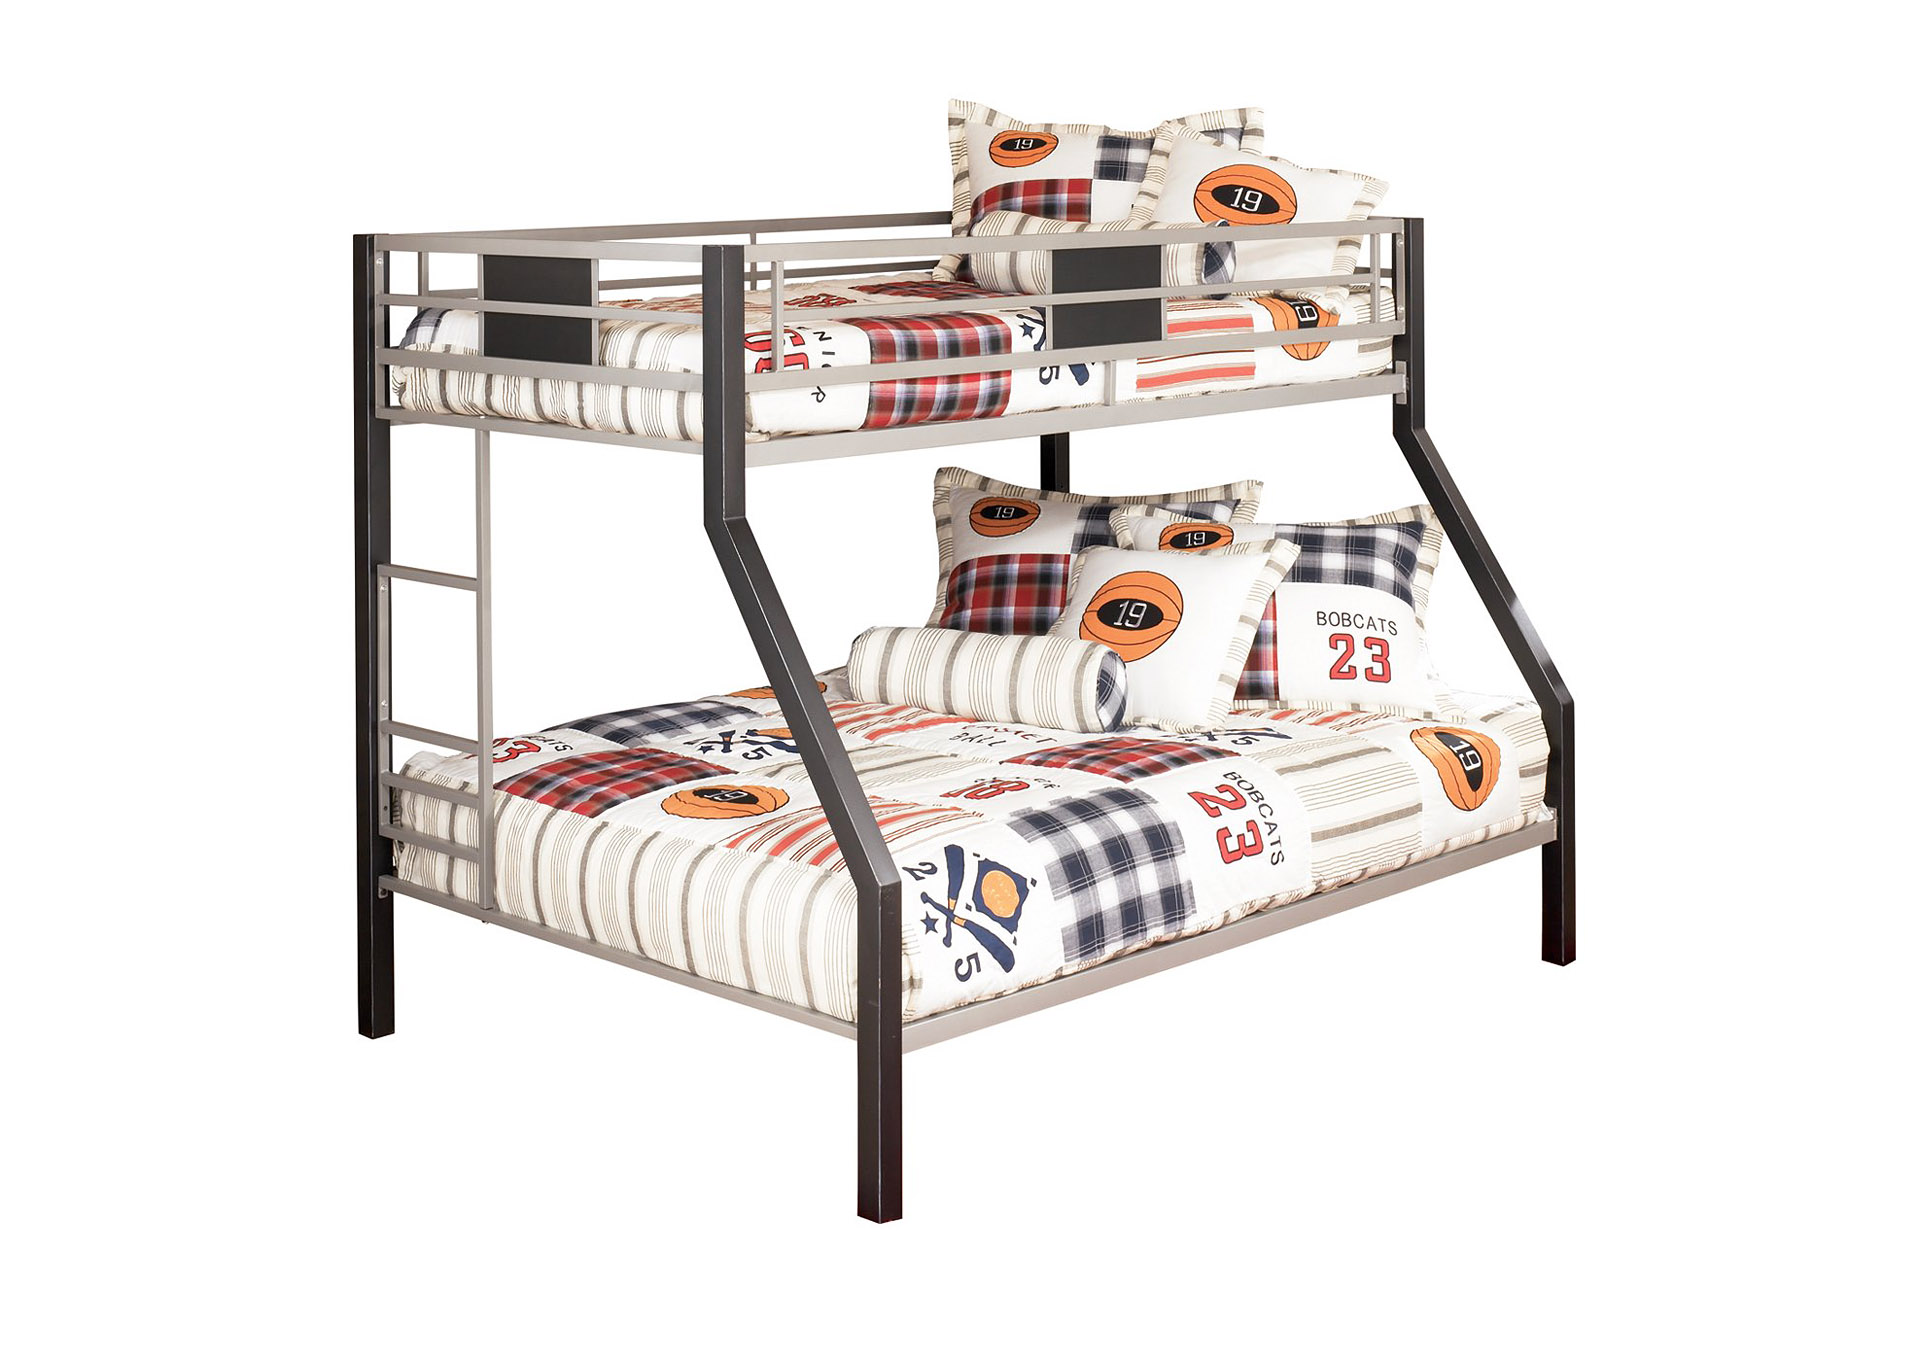 DINSMORE TWIN/FULL BUNK BED W/LADDER